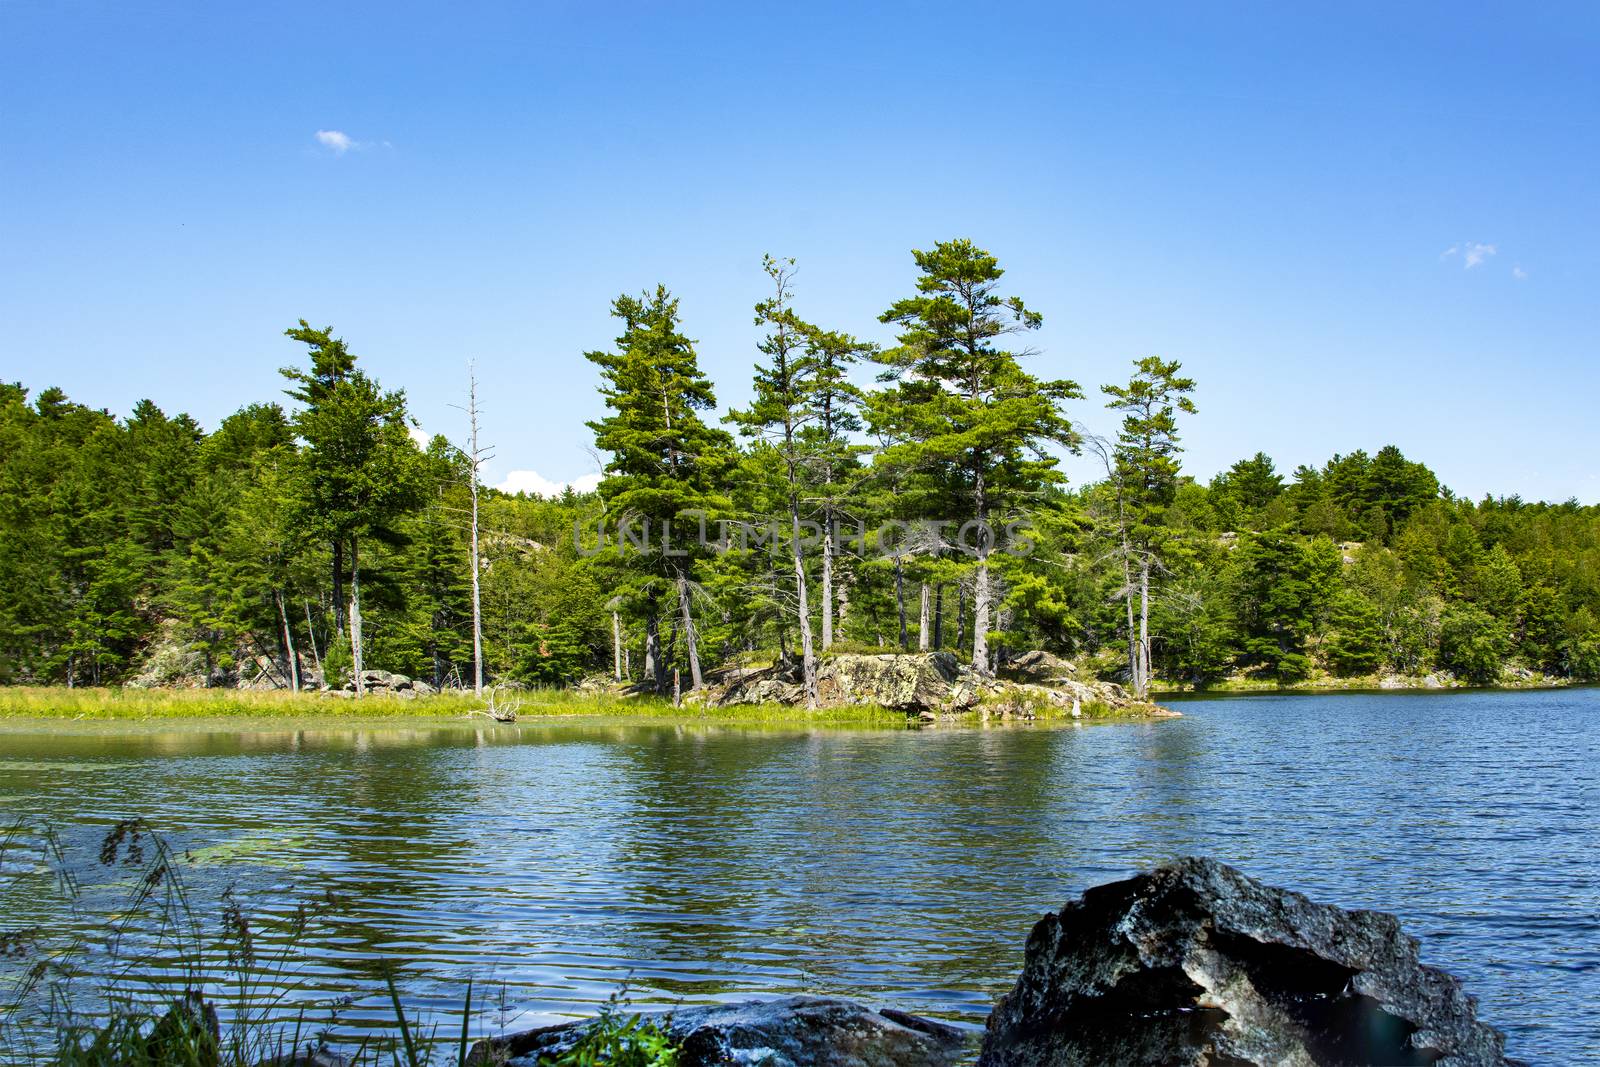 Landscape with a small island with tall trees and large stones on a lake surrounded by a wild forest